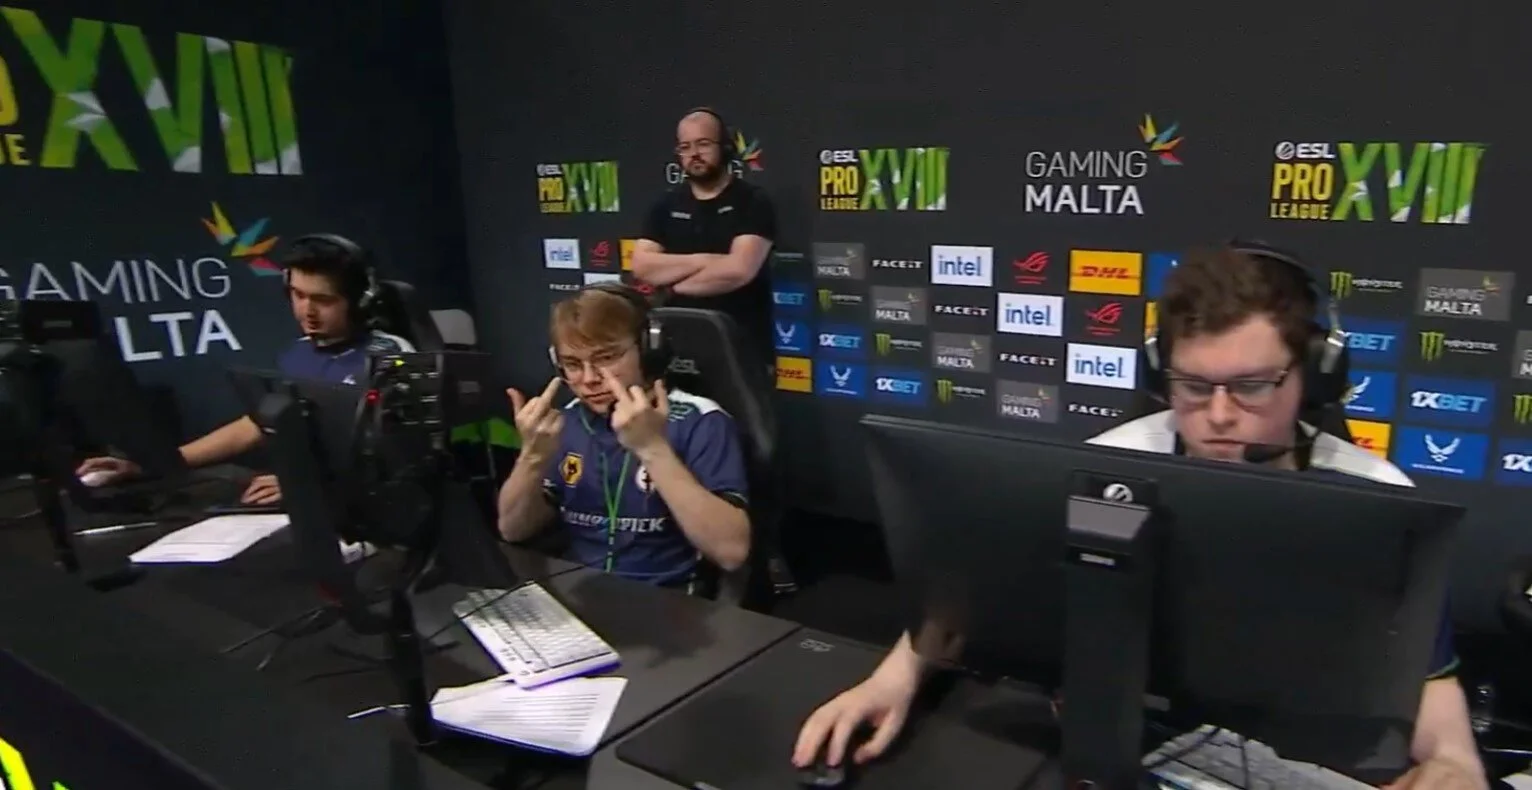 HexT showed his middle finger to the camera after winning a round at ESL Pro League Season 18